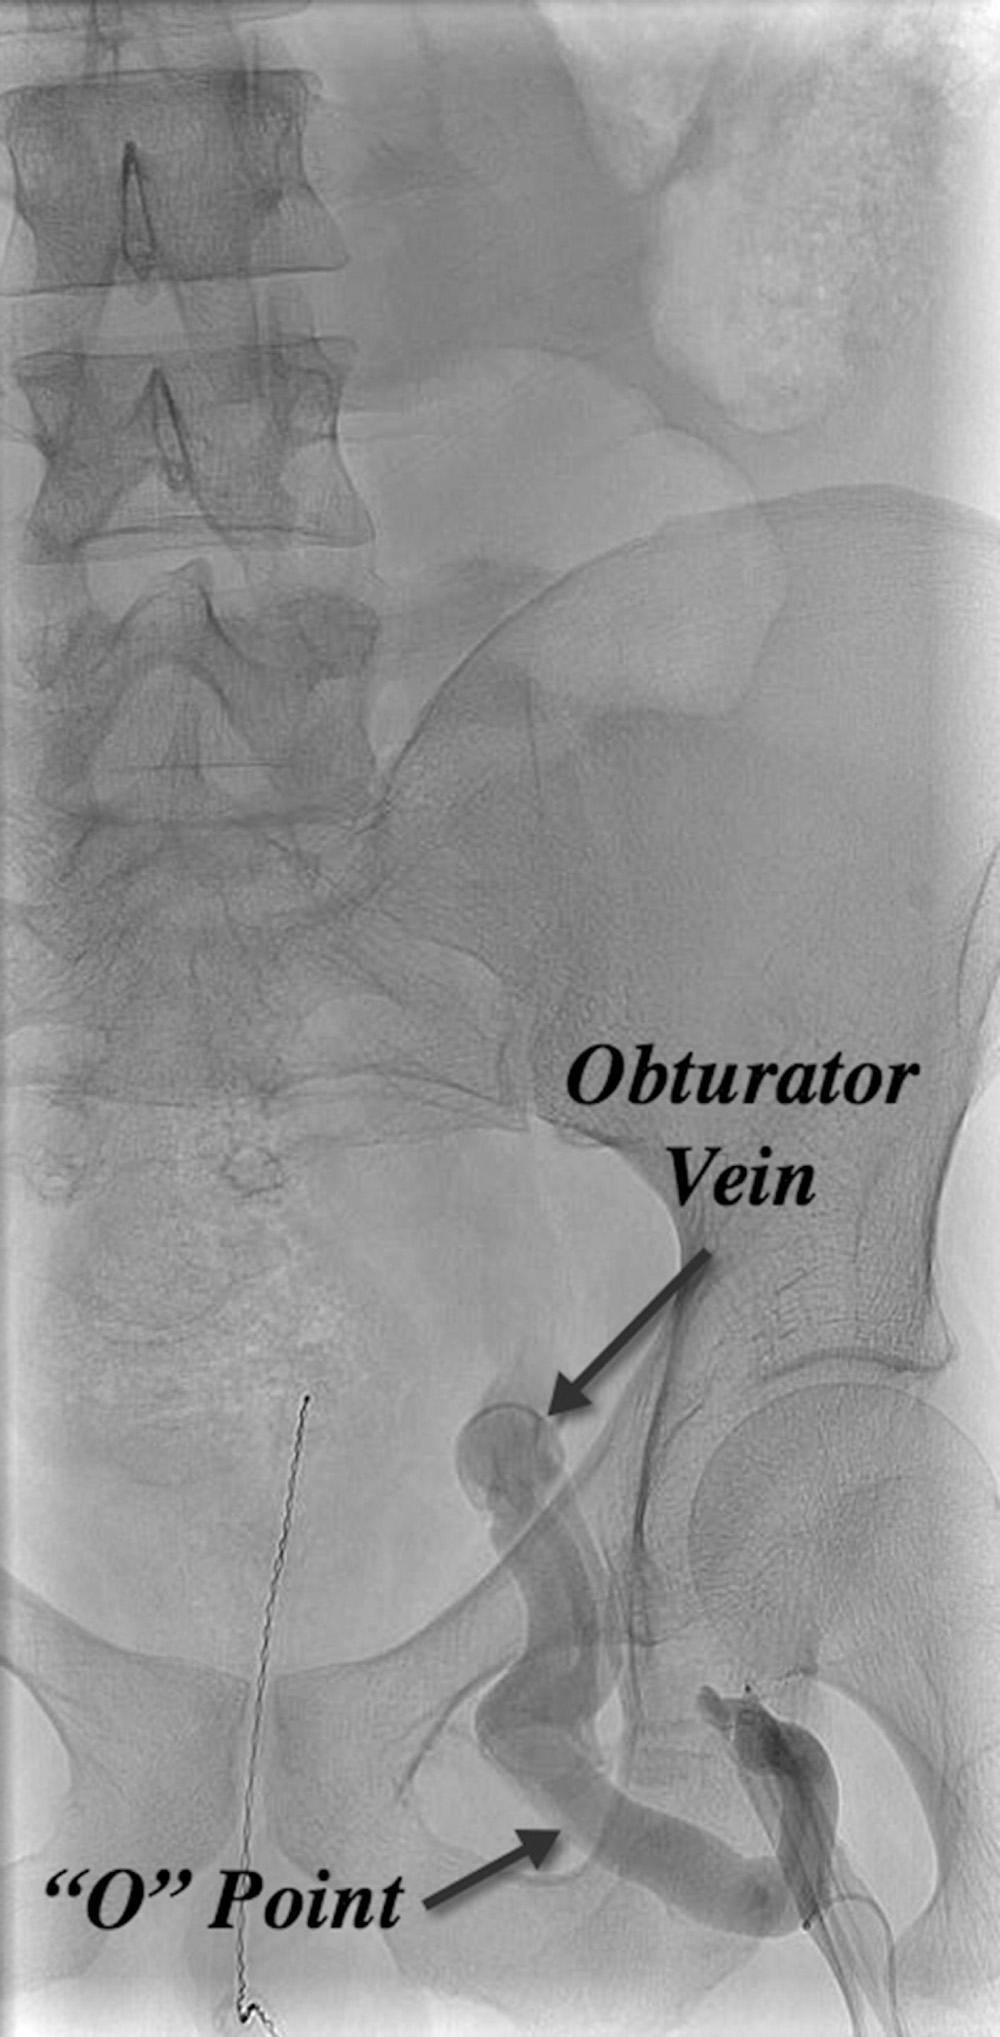 Fig. 21.4, Retrograde venogram demonstrating communication of the great saphenous vein with the obturator tributary of the internal iliac vein through the “O” point.